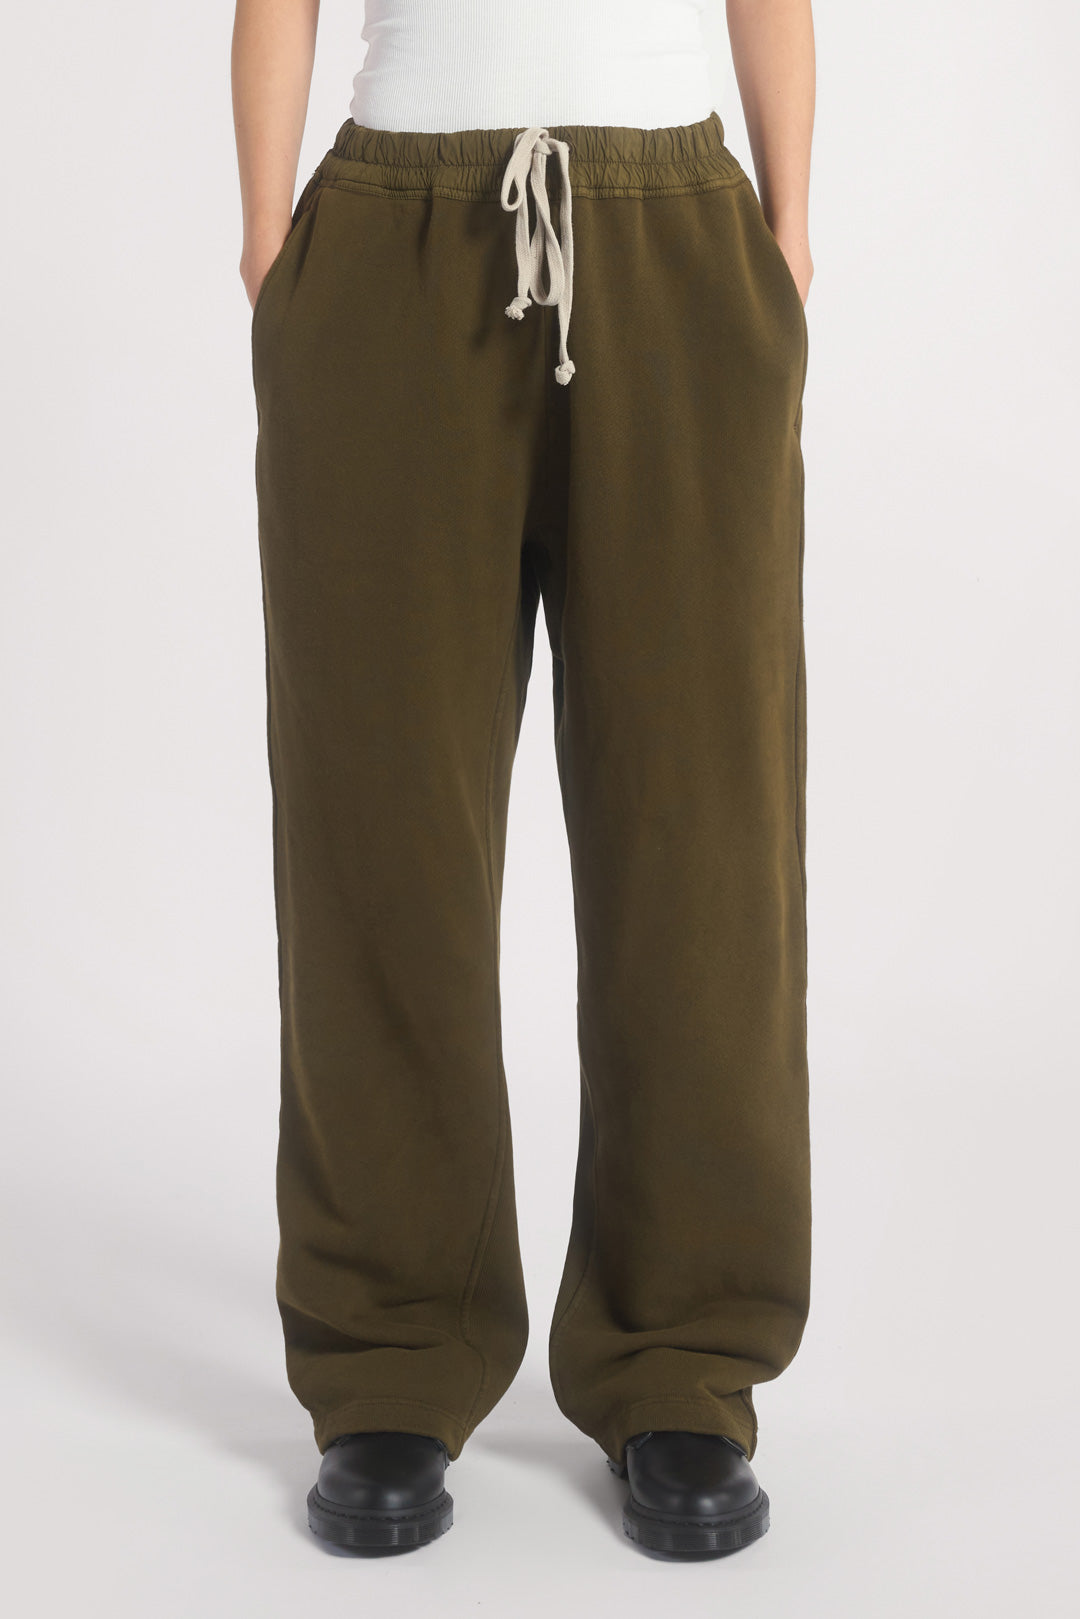 Jaded London NTRLS Moss Relaxed Joggers